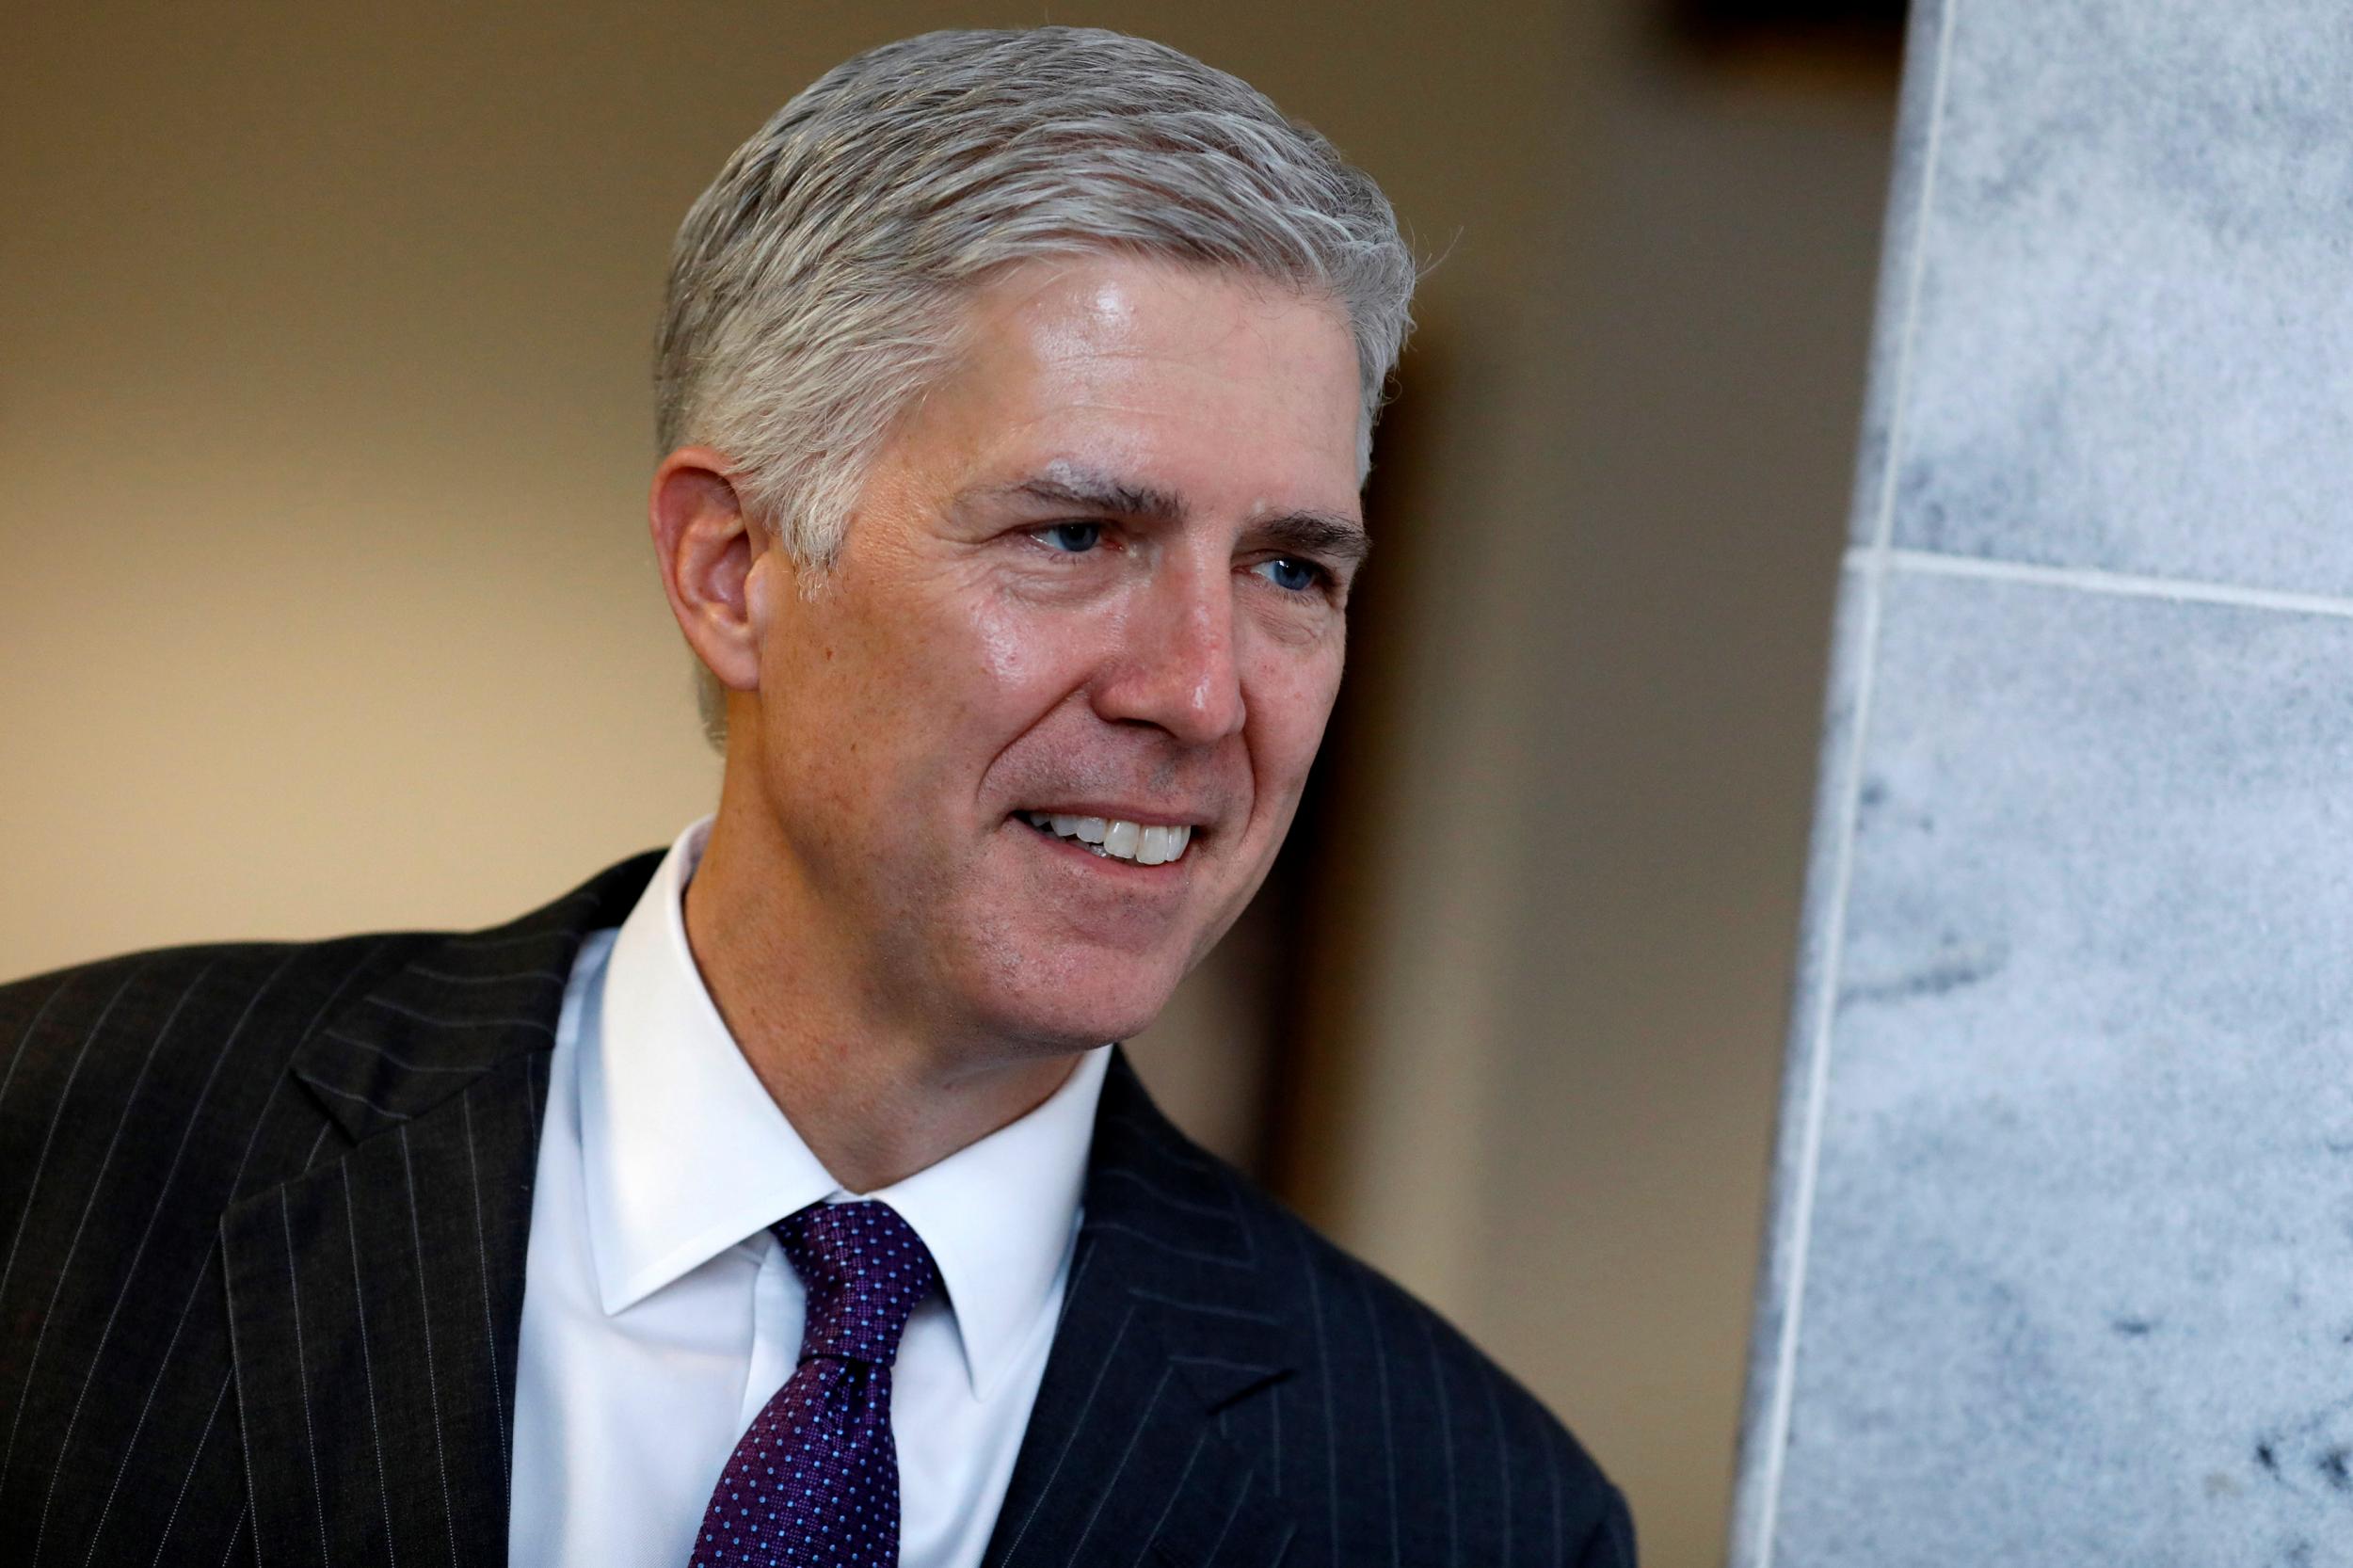 Judge Neil Gorsuch’s Senate confirmation hearings have begun and he will be questioned on everything from his stance on women’s rights to his decisions regarding corporations